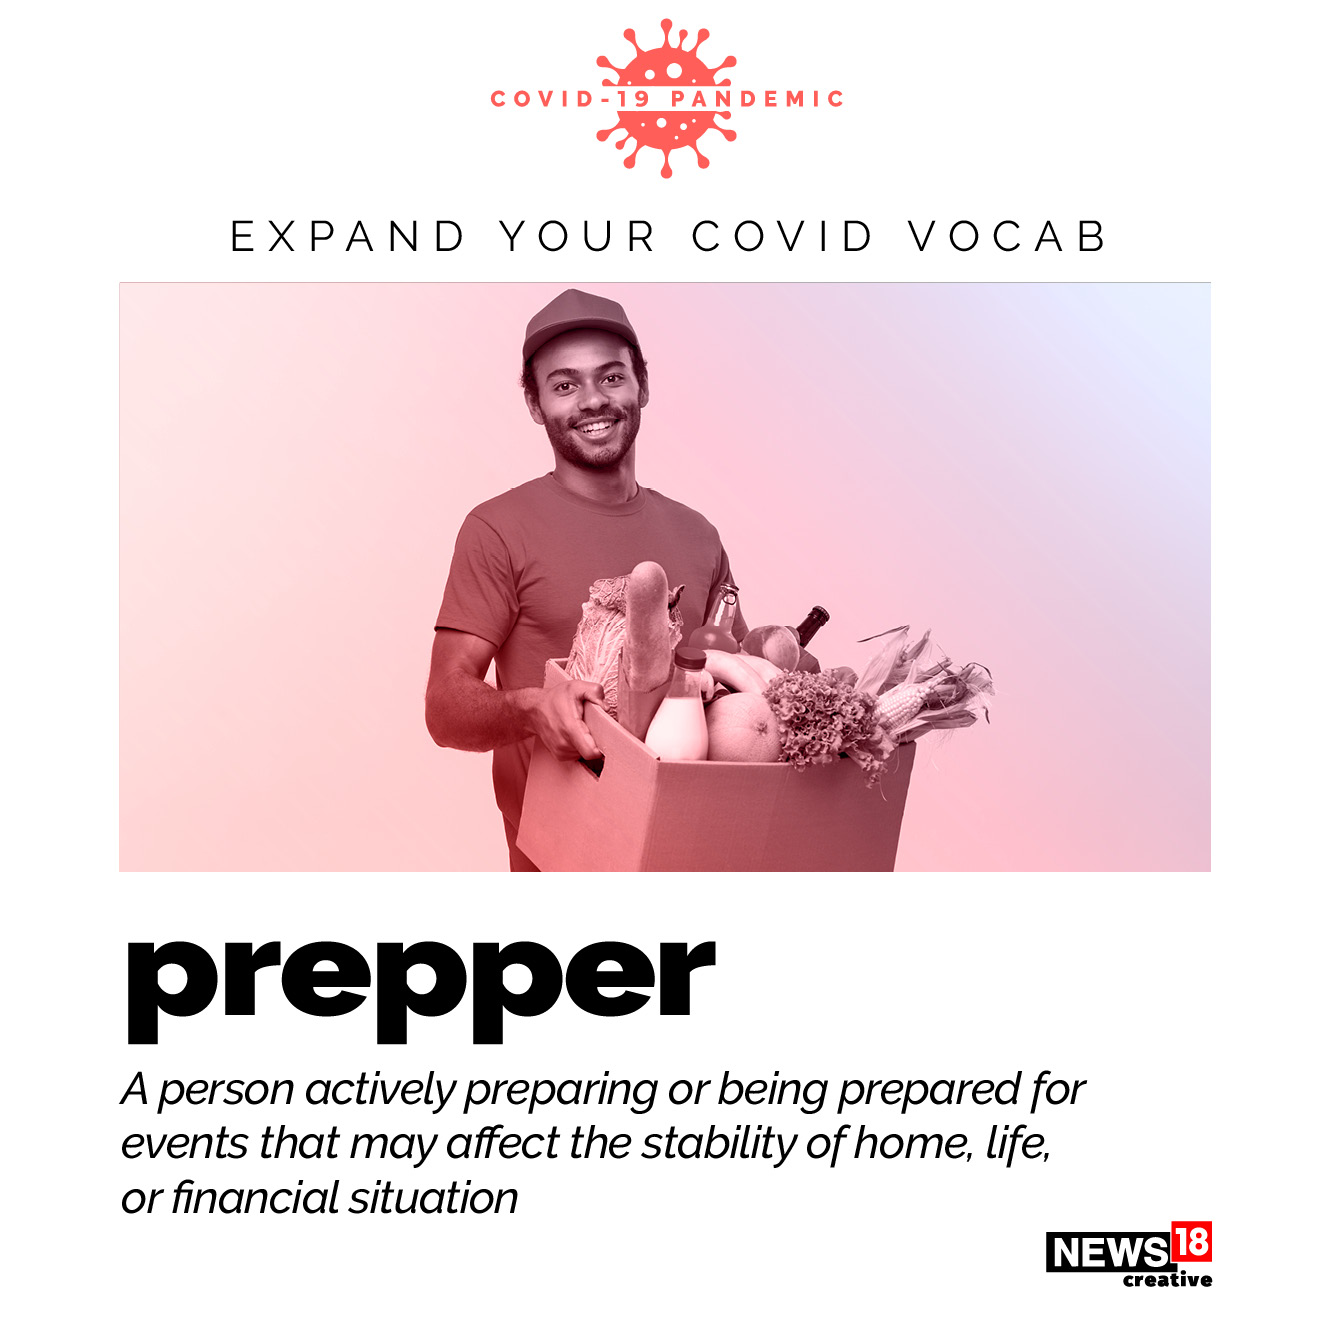 Are you a prepper or a Covidiot? Catch up on all the Covid lingo